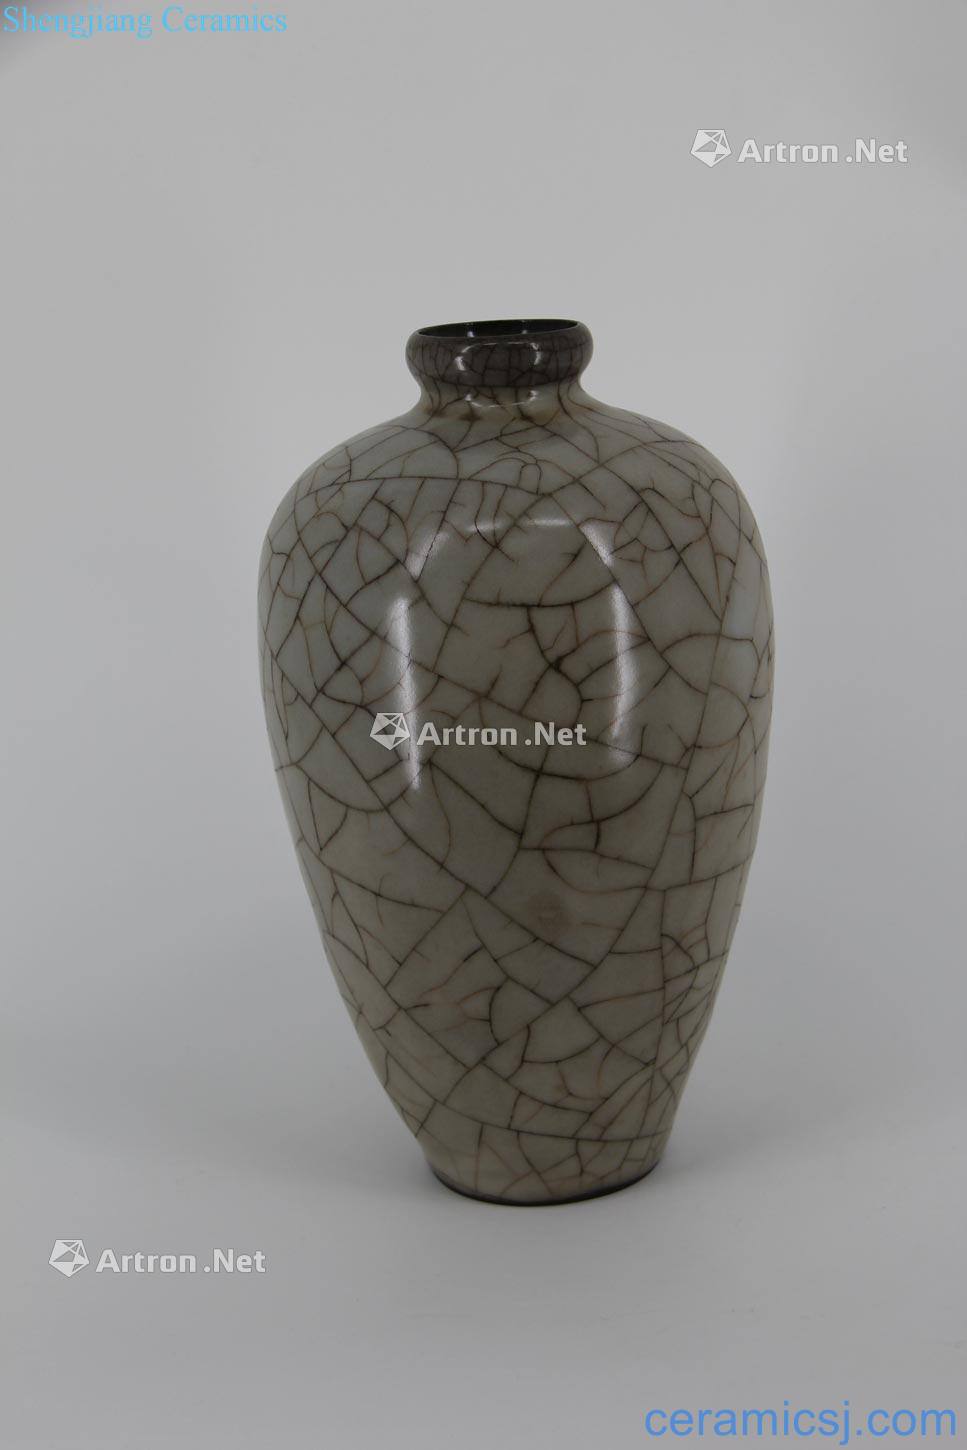 The song kiln piece small mouth bottle